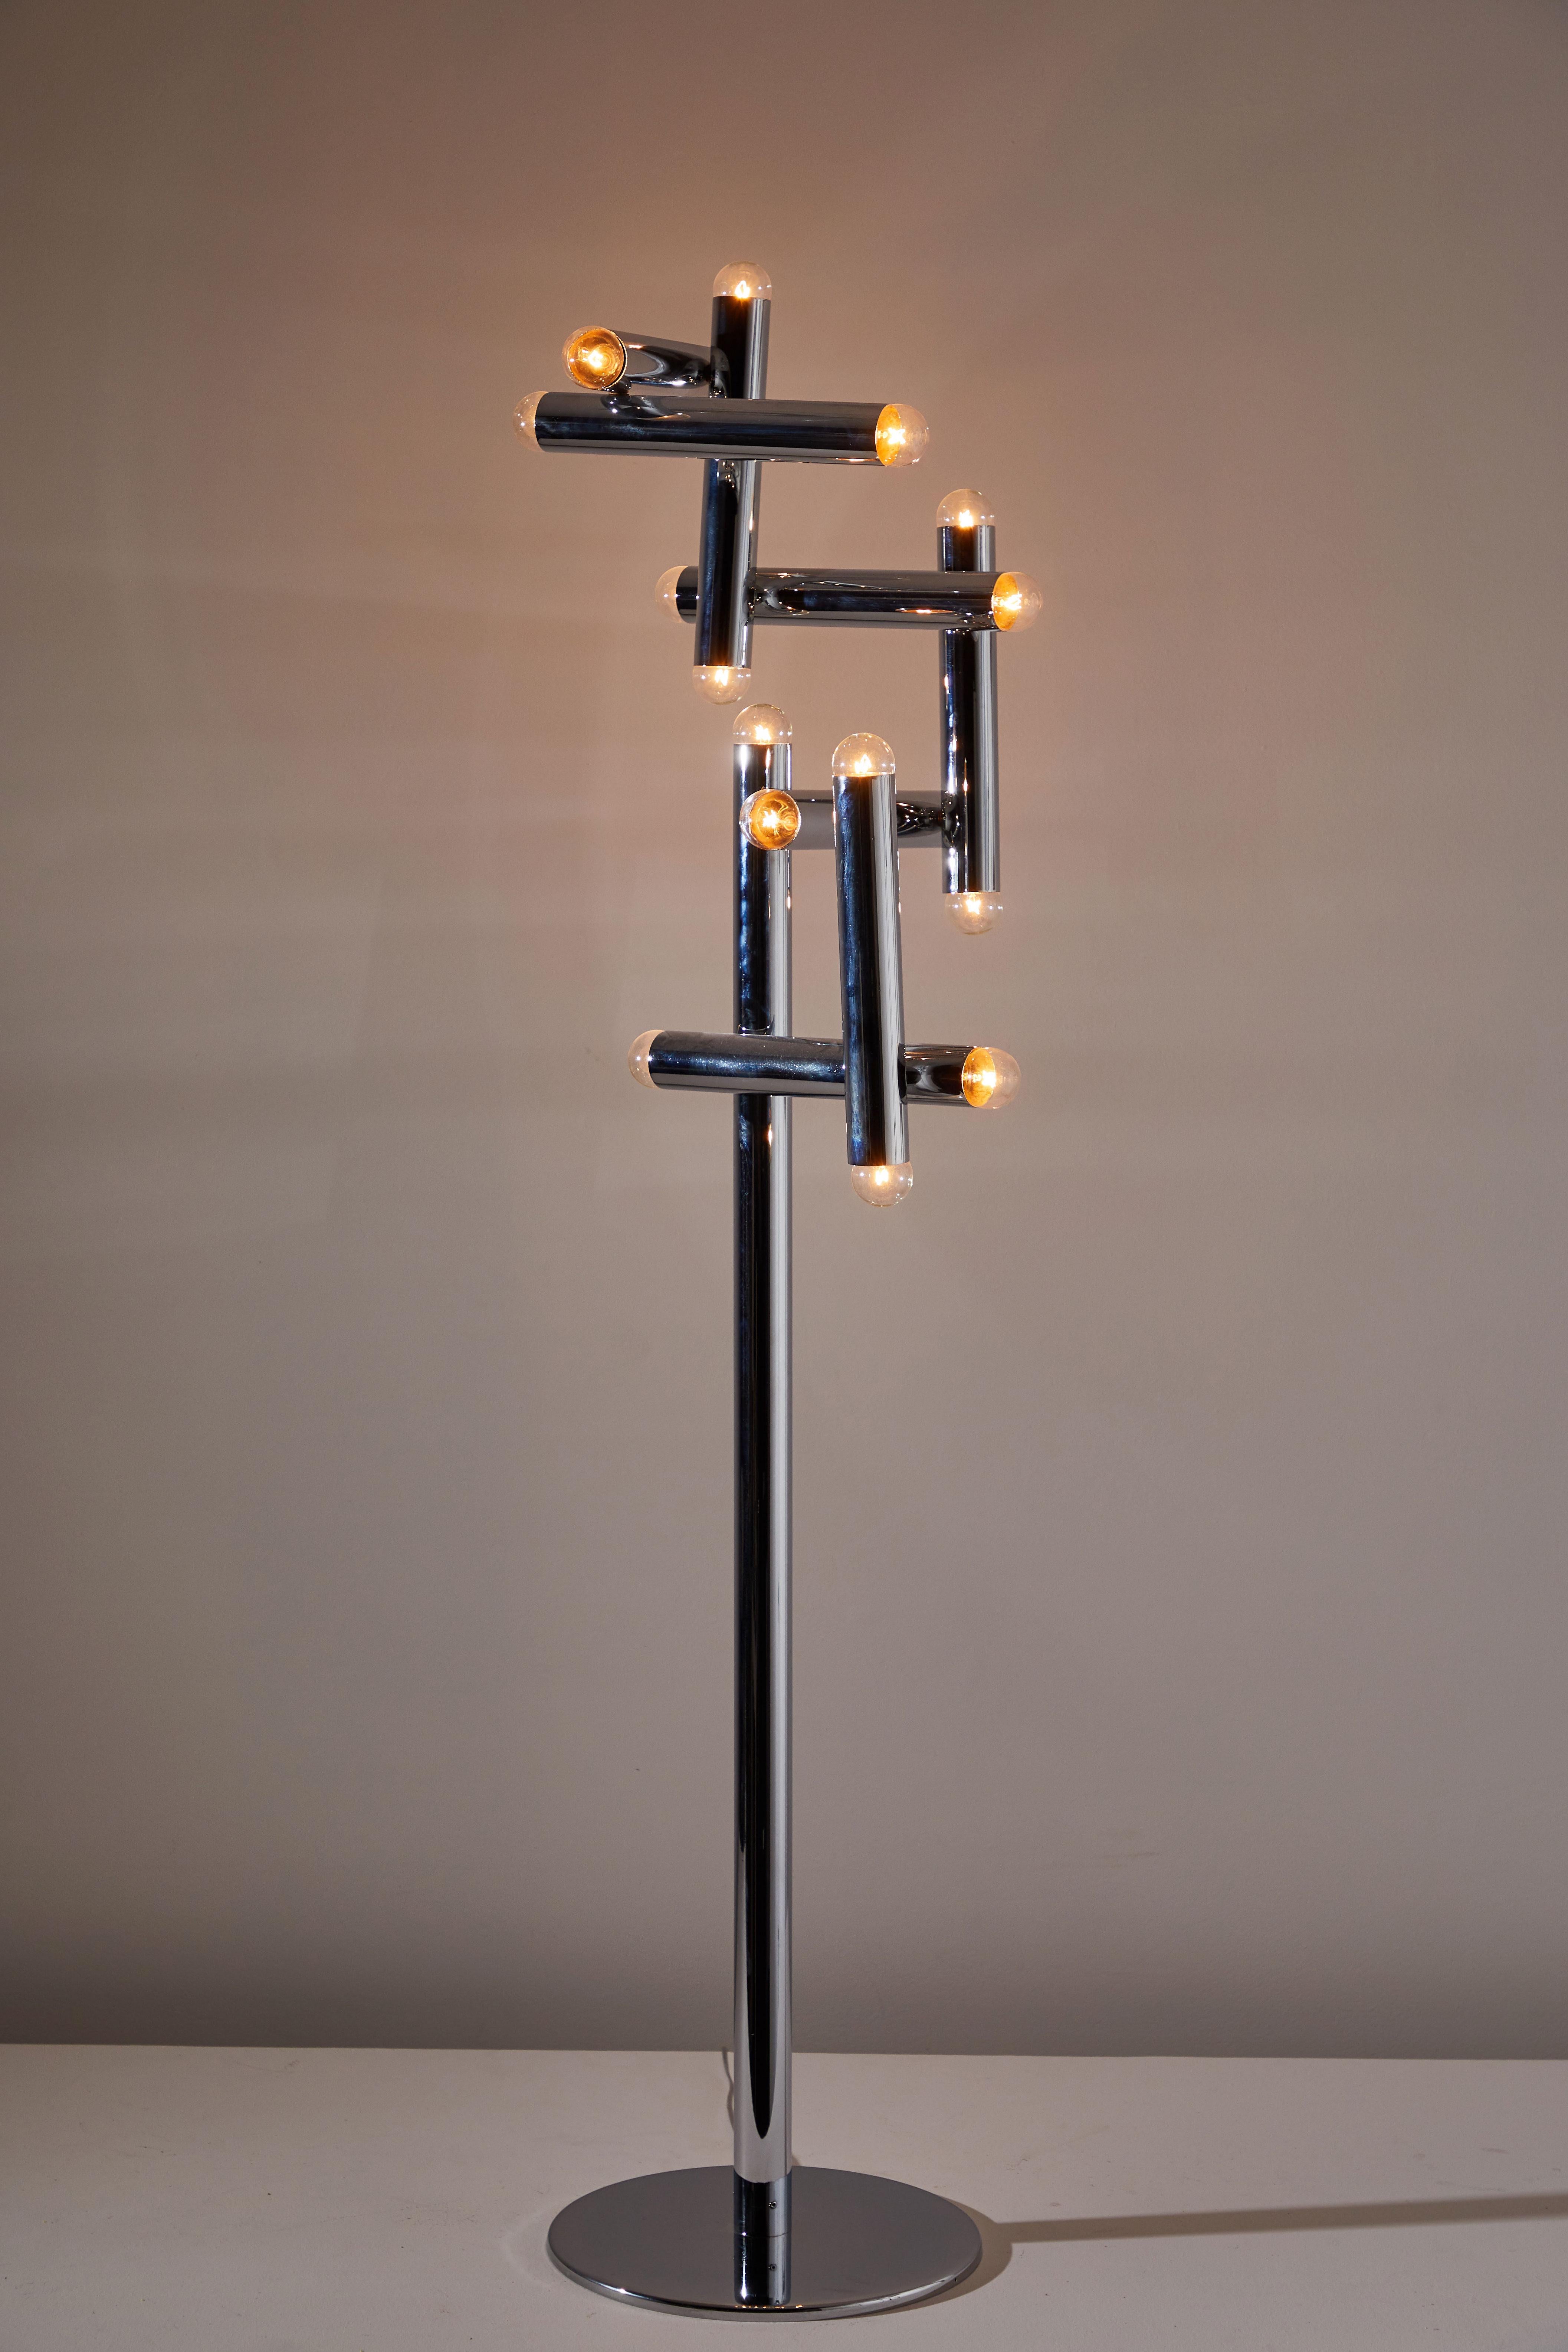 Floor lamp by Stilux. Manufactured in Italy, circa 1970s. Chrome-plated steel. Original European cord. Takes seventeen E26 15w maximum bulbs. Bulbs provided as a one time courtesy.